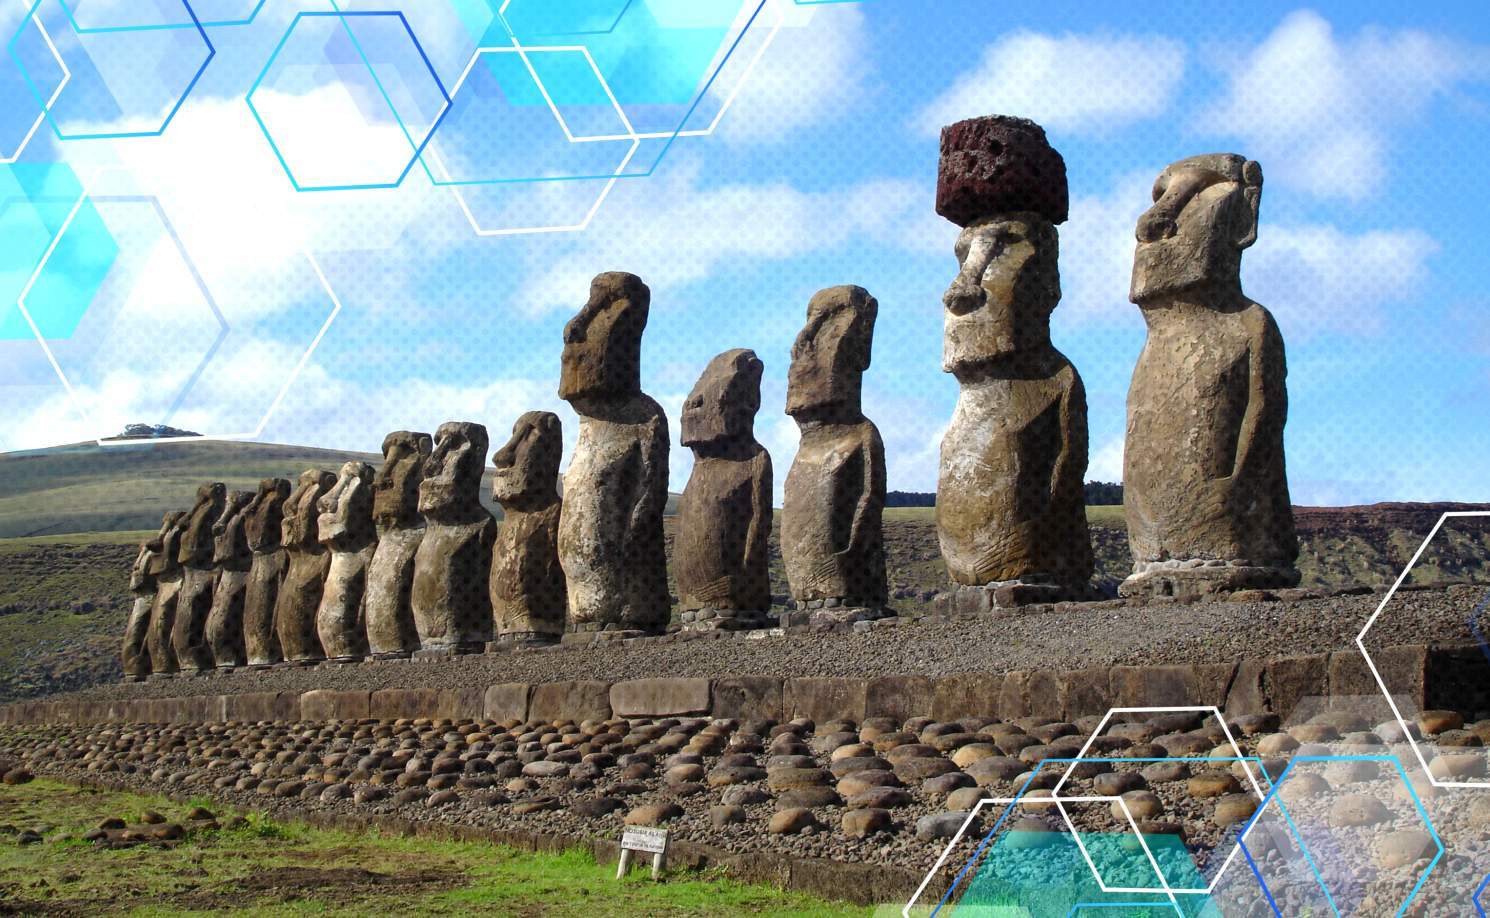 Easter island mystery: The origin of the Rapa Nui people 3